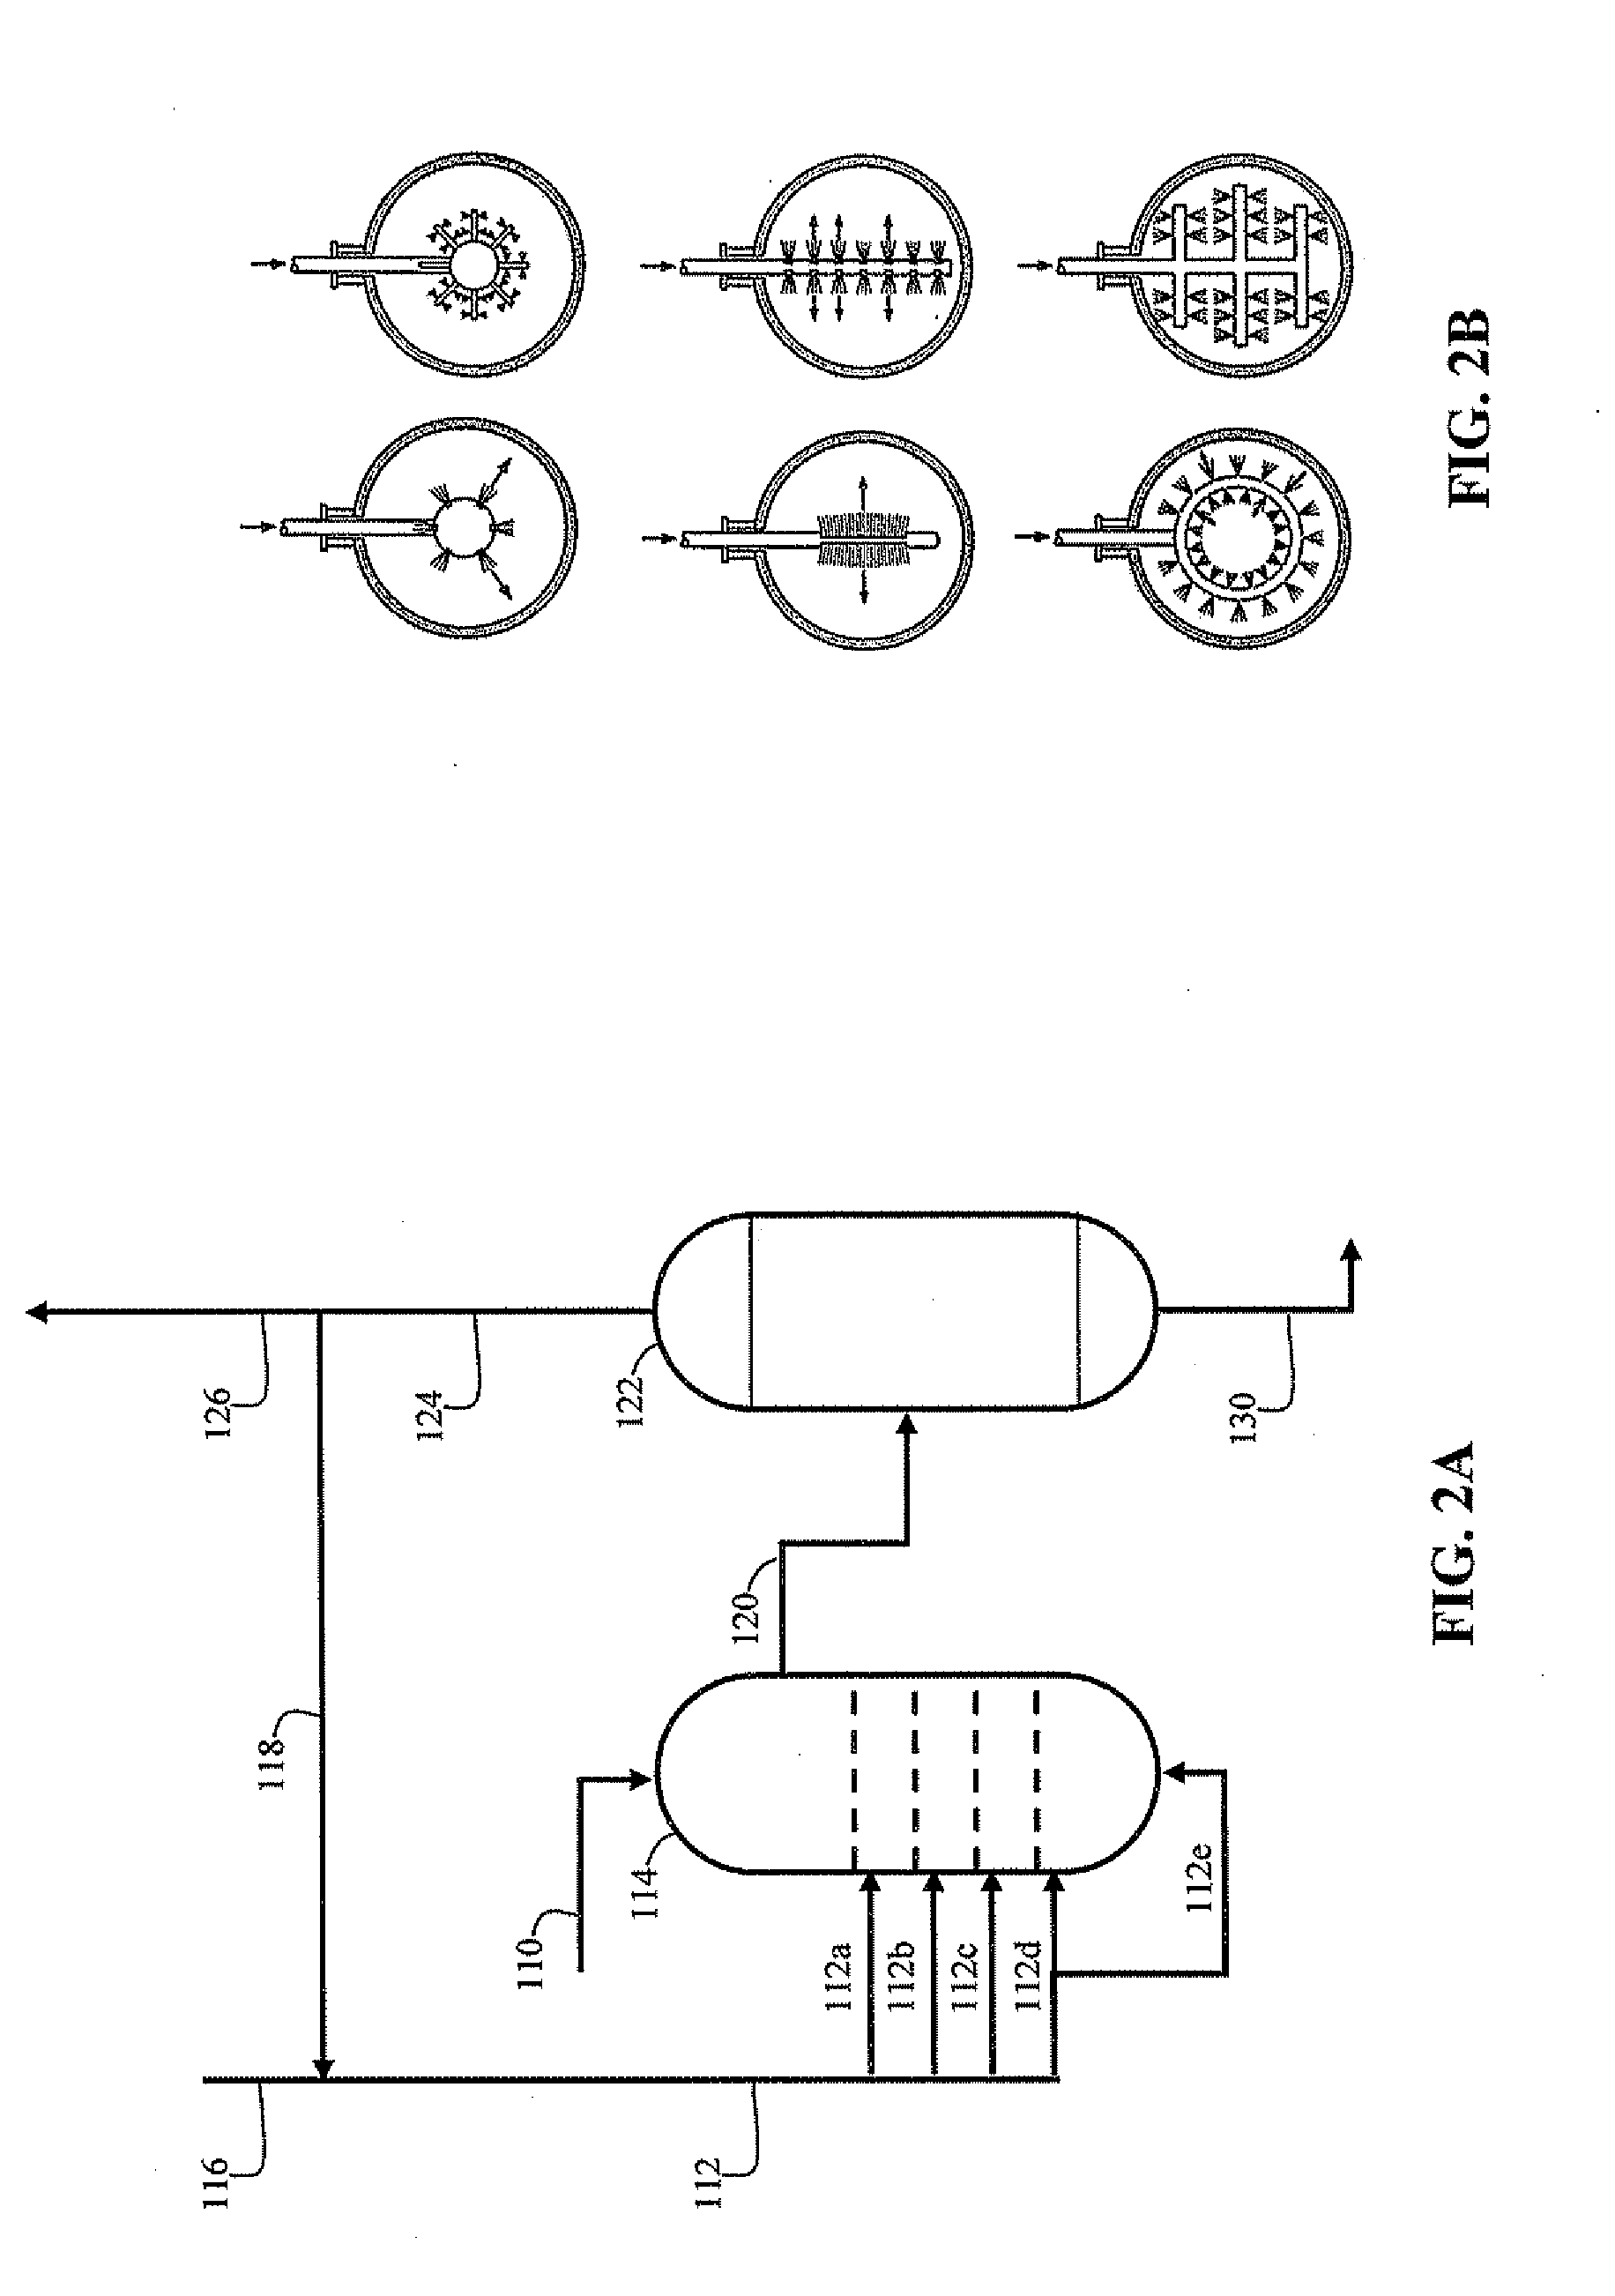 Hydrogen-enriched feedstock for fluidized catalytic cracking process